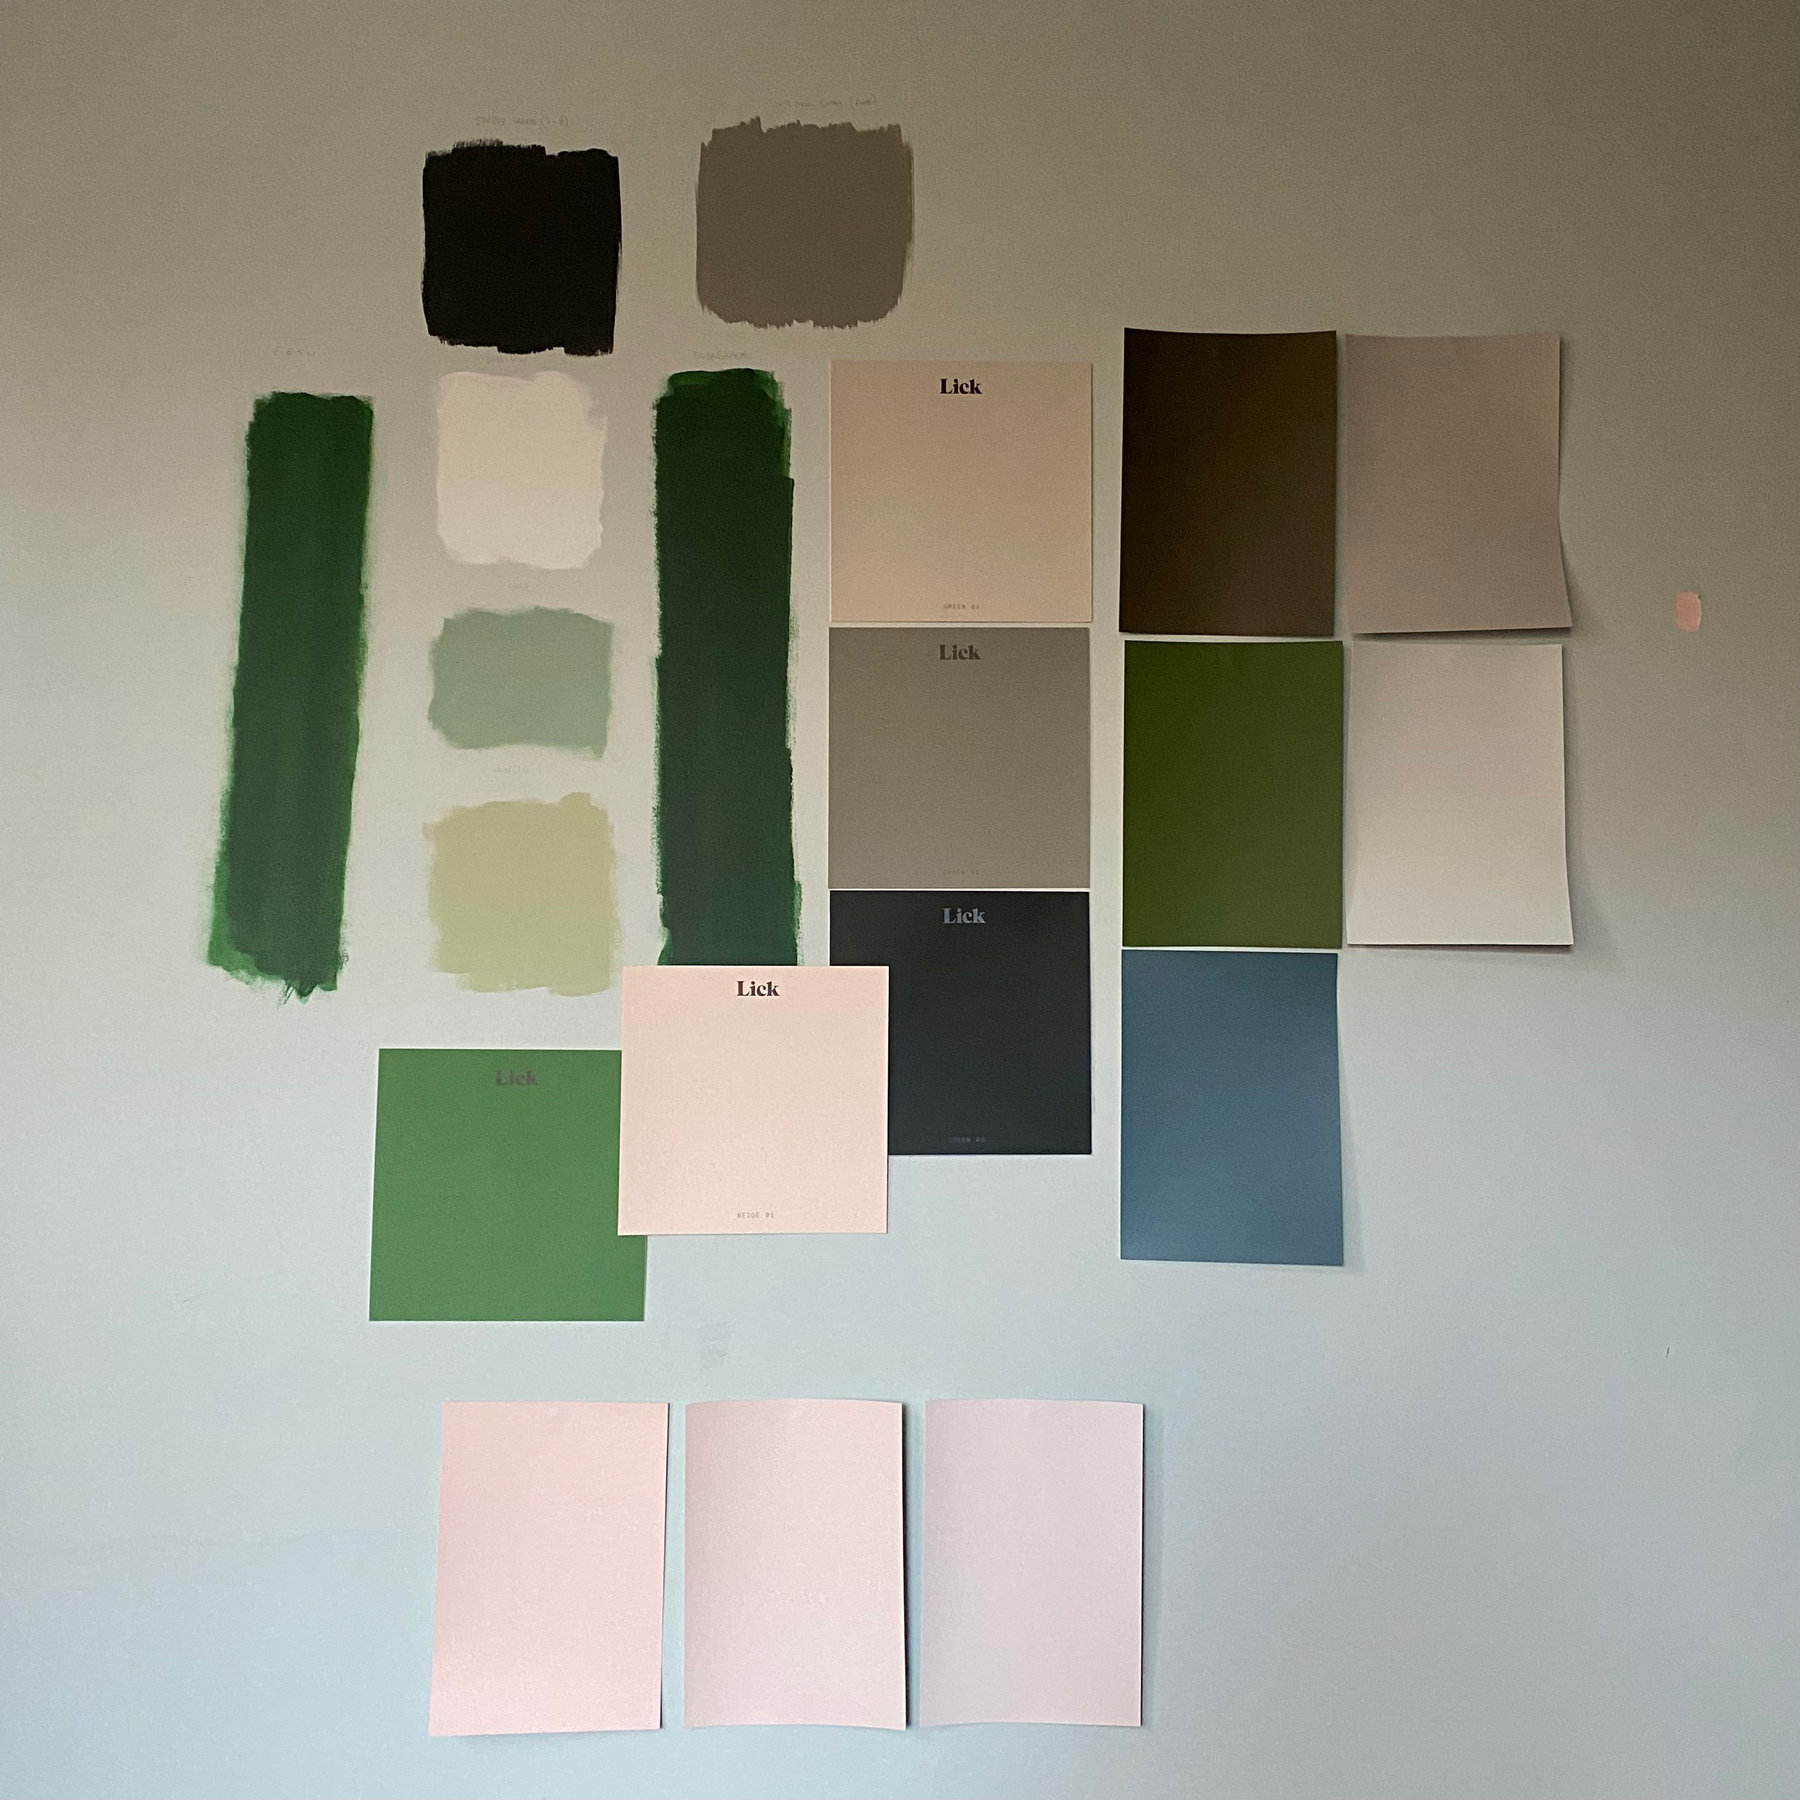 A wall covered in 20 different green and neutral paint patches